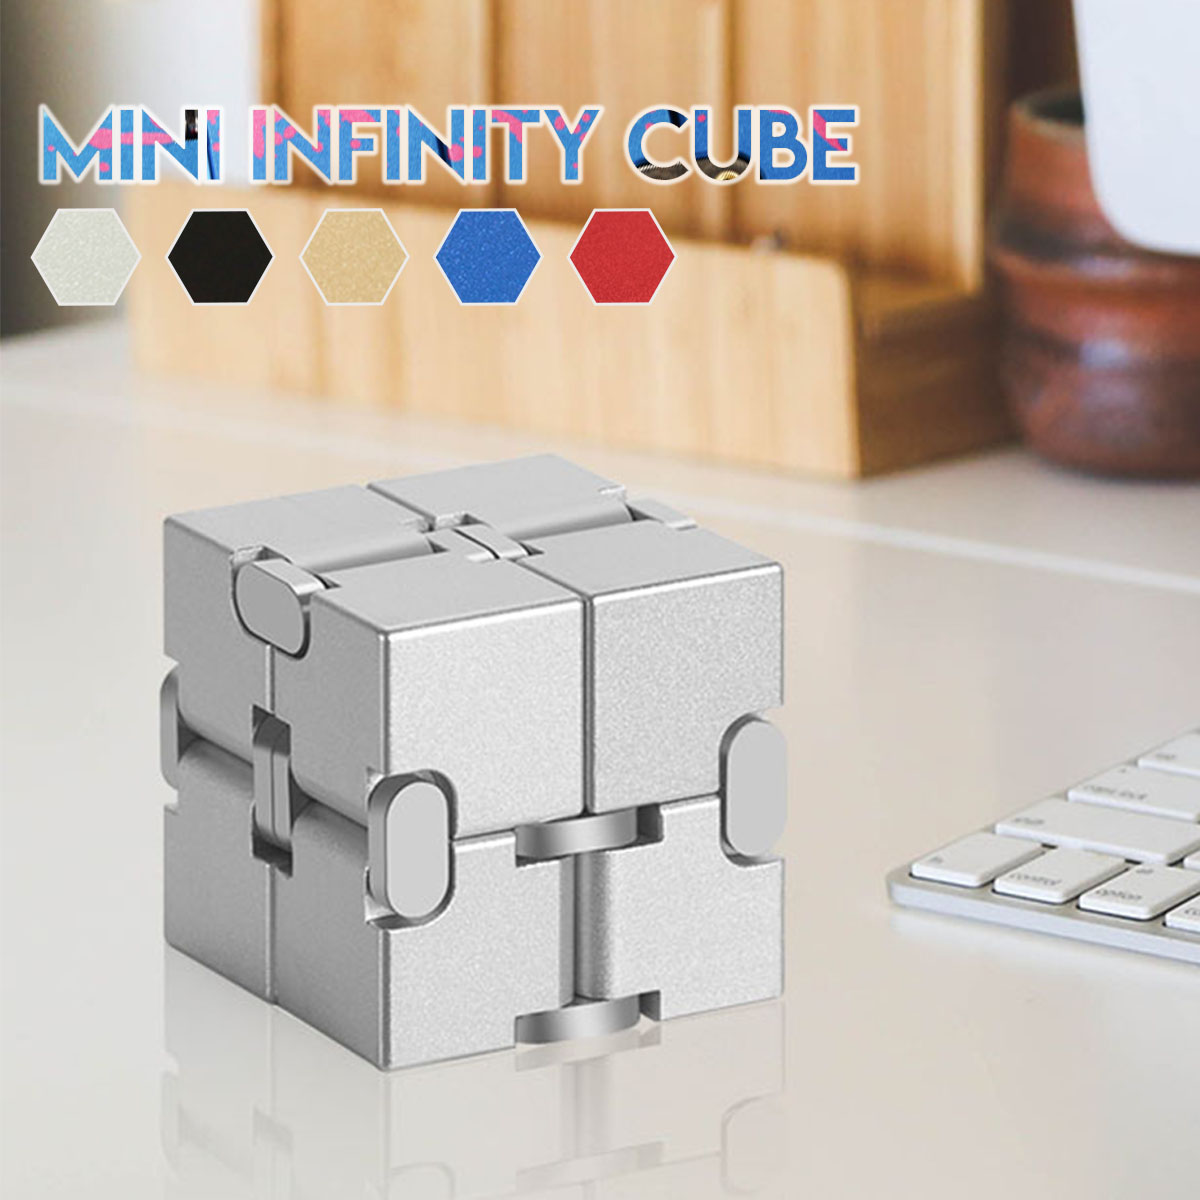 Mini-Infinity-Funny-Magic-Cube-Aluminum-Alloy-Anxiety-Stress-Relief-Blocks-Toy-for-Kids-Adult-1541126-3